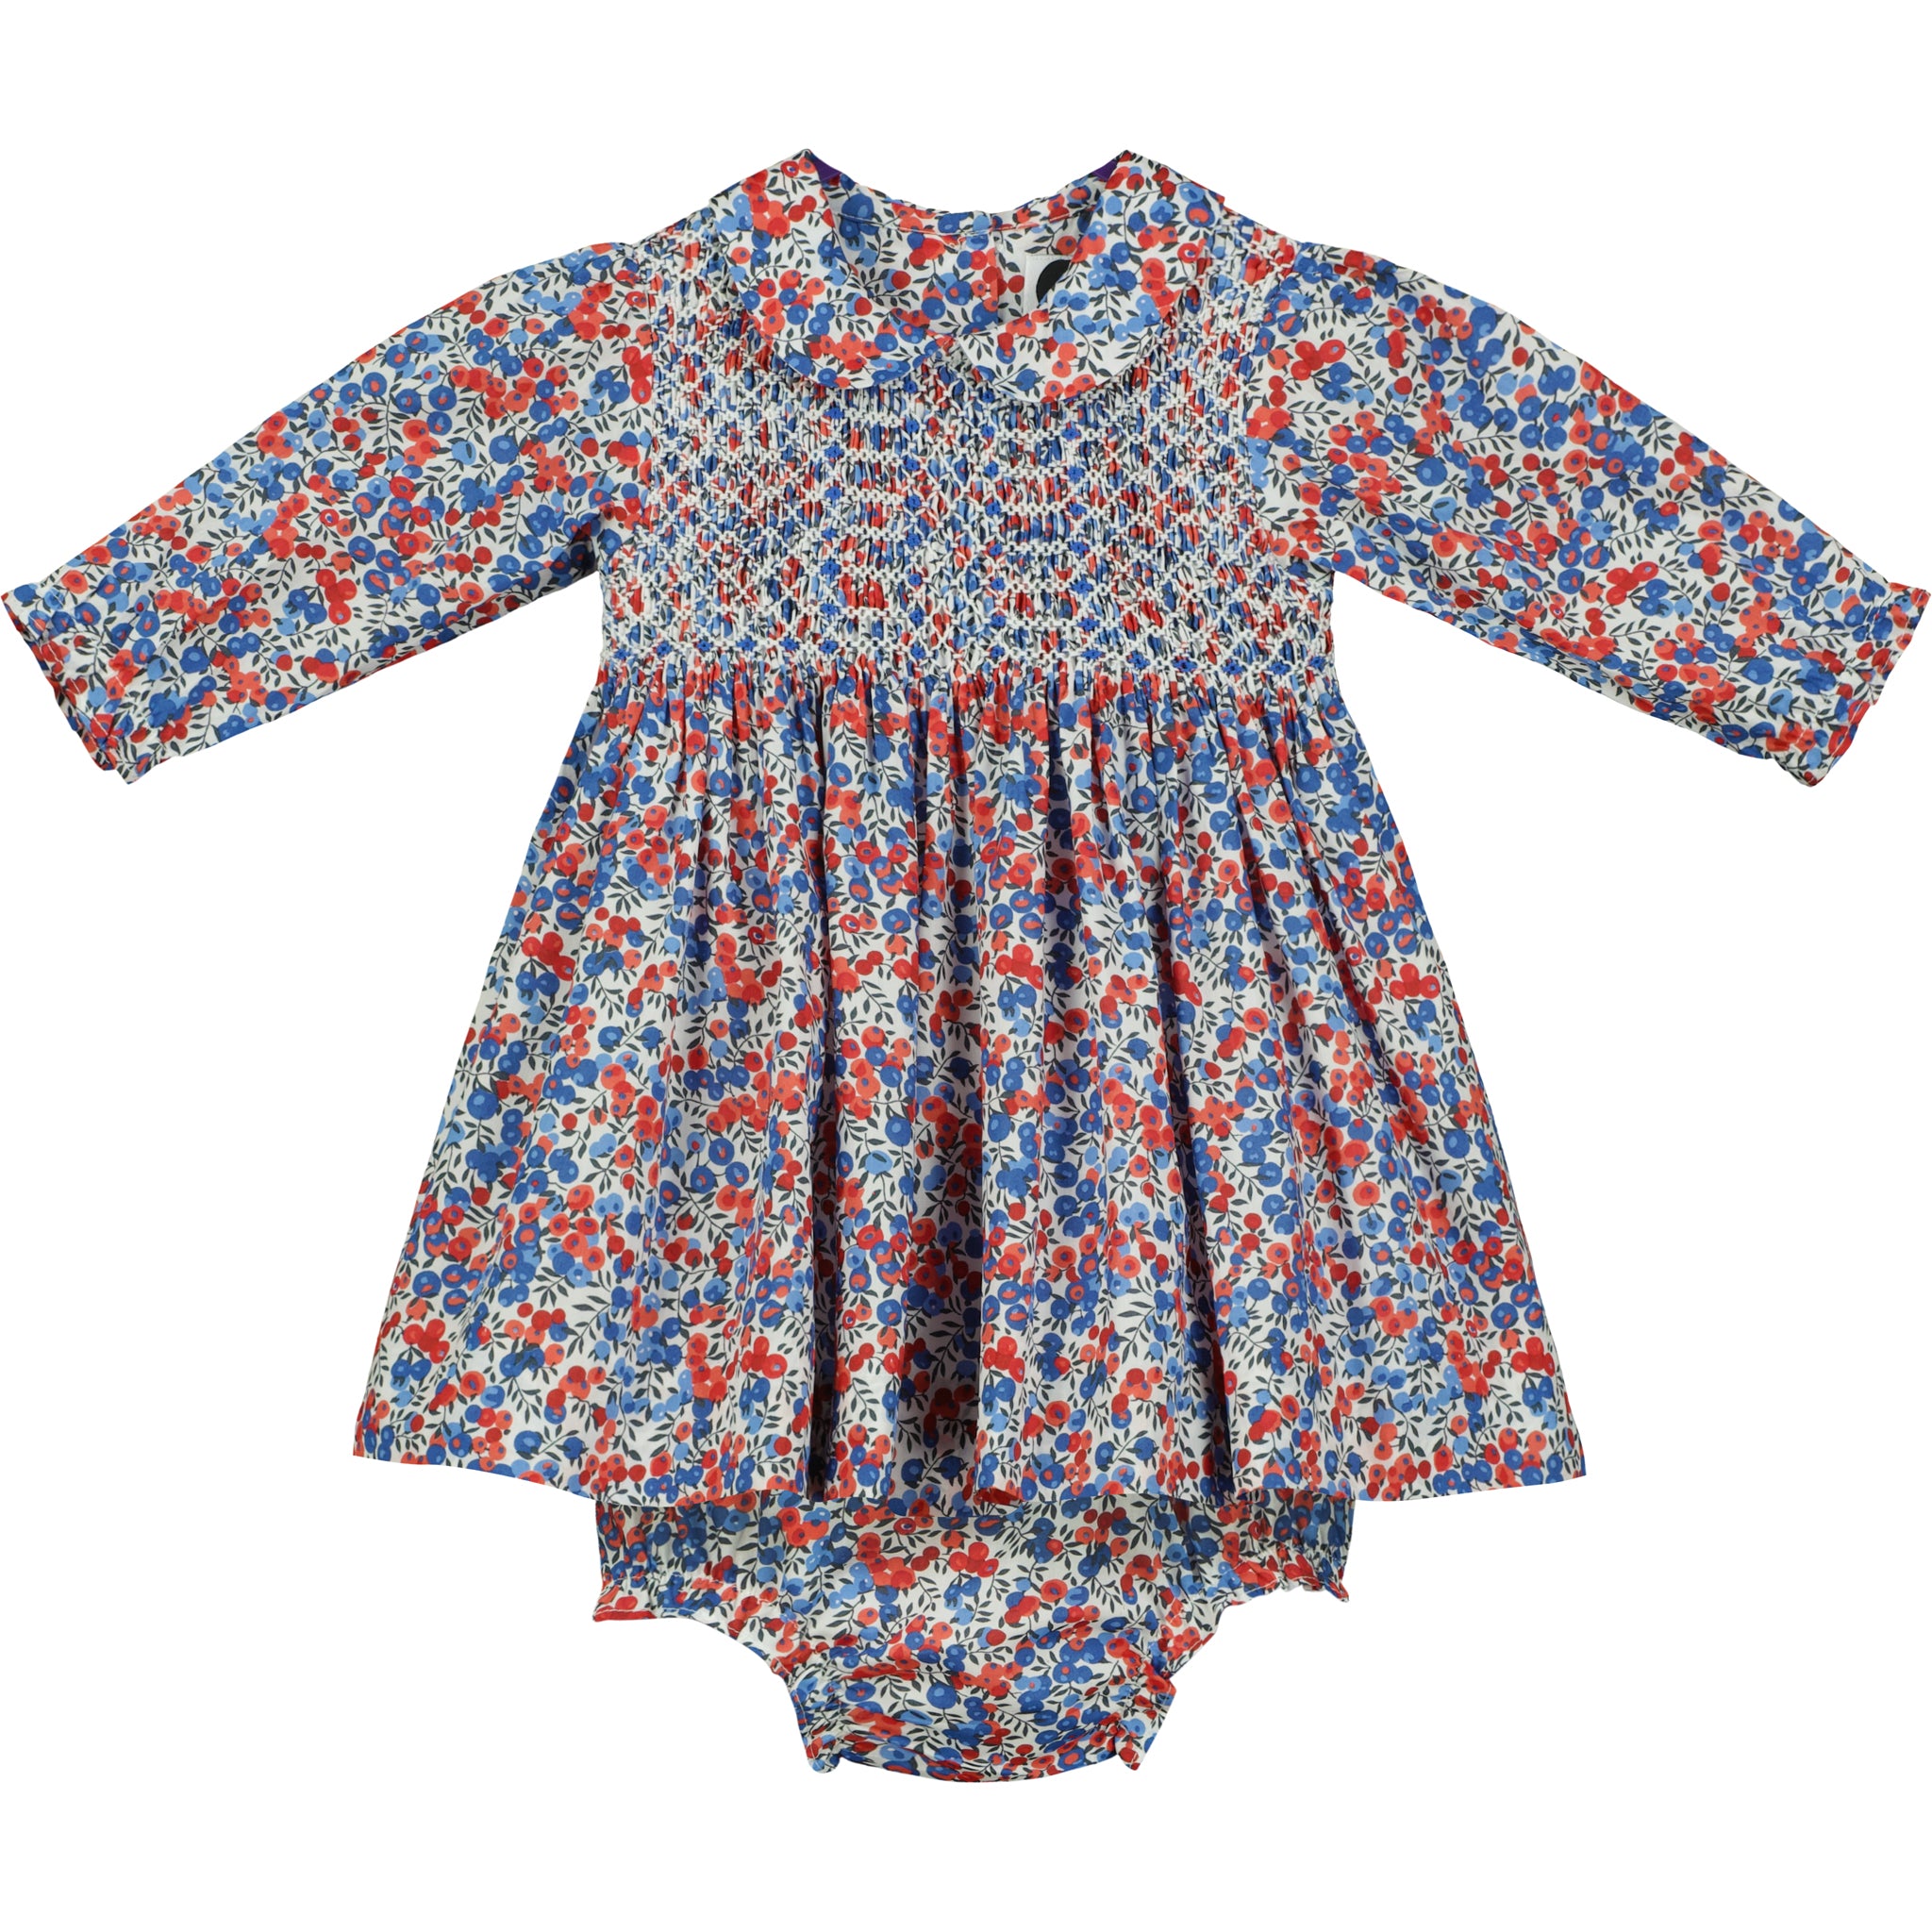  Blue and red Wiltshire Tana Lawn™ Cotton  Liberty print dress with hand-smocking, front